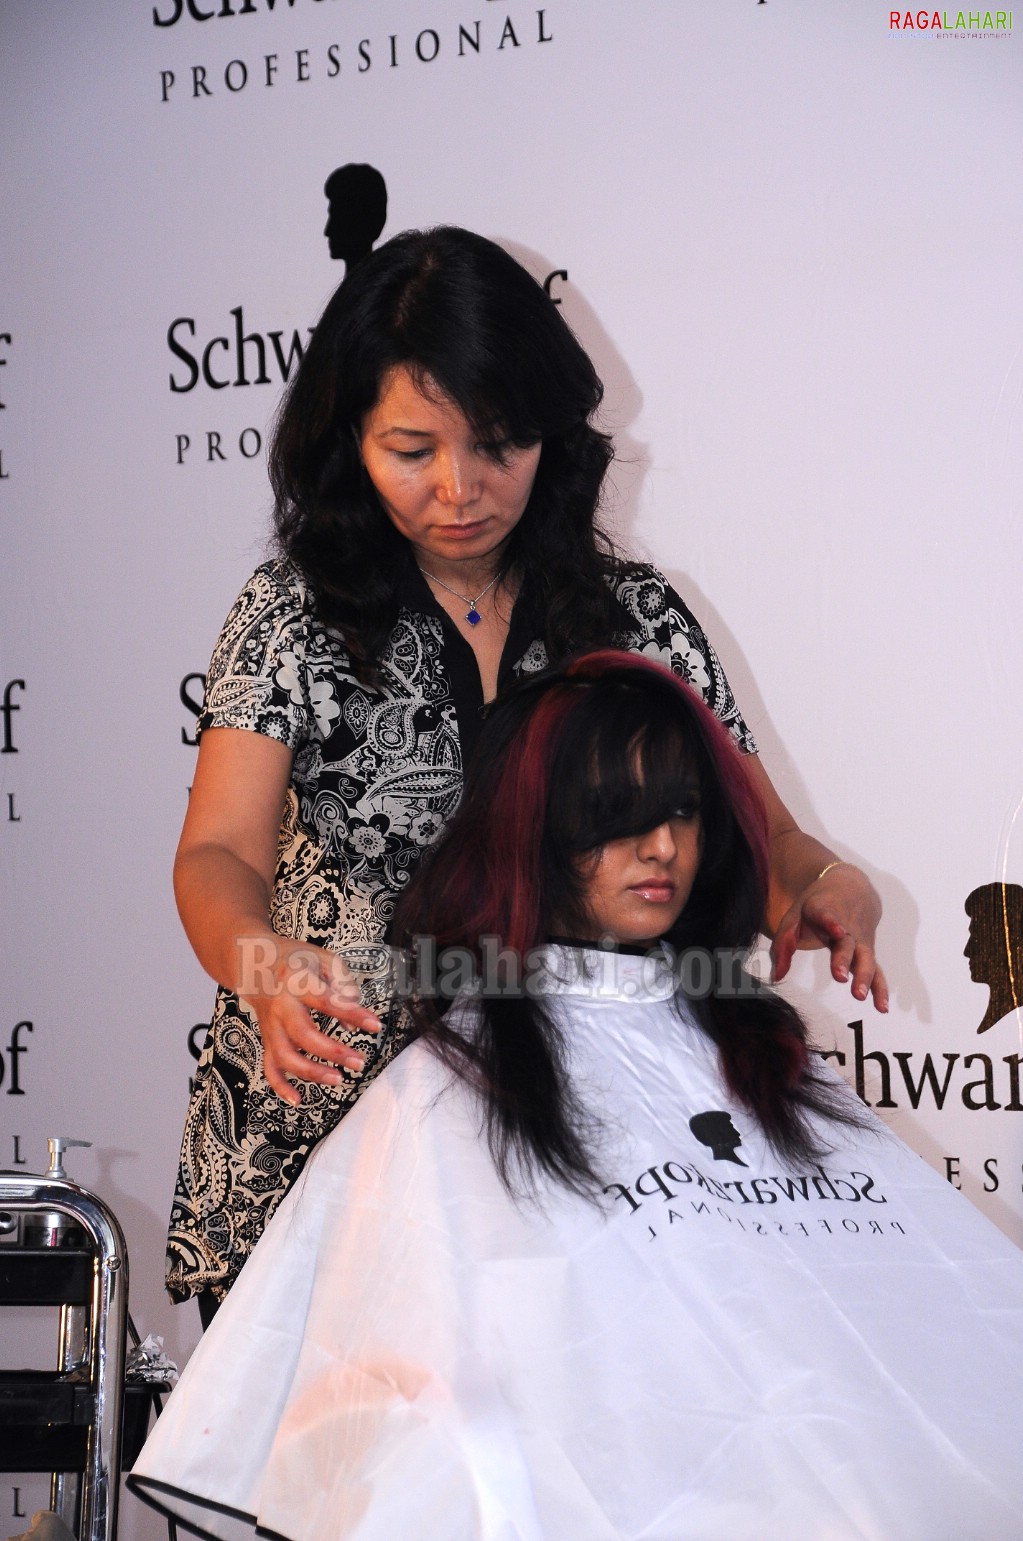 Schwarzkopf Professional Hair Styling Products & Saloon Launch